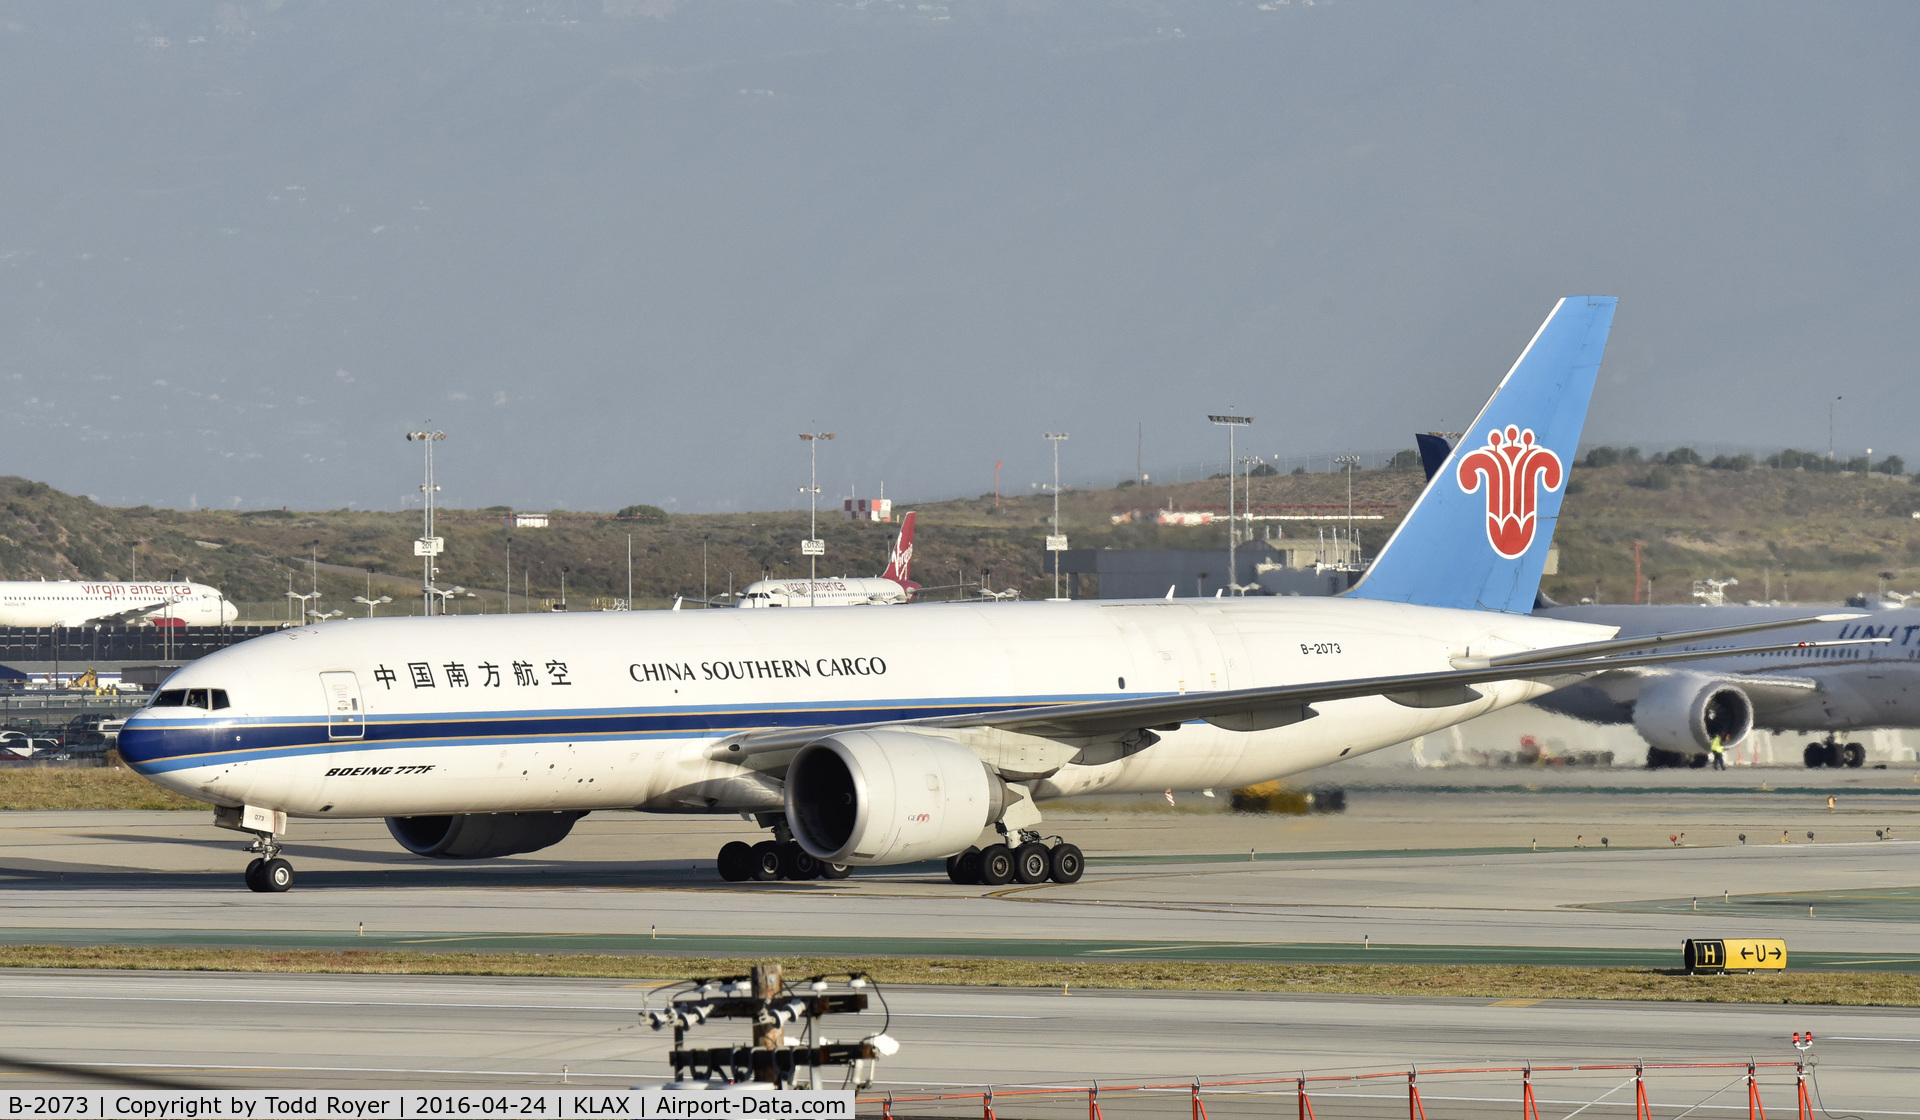 B-2073, 2009 Boeing 777-F1B C/N 37311, Taxiing at LAX